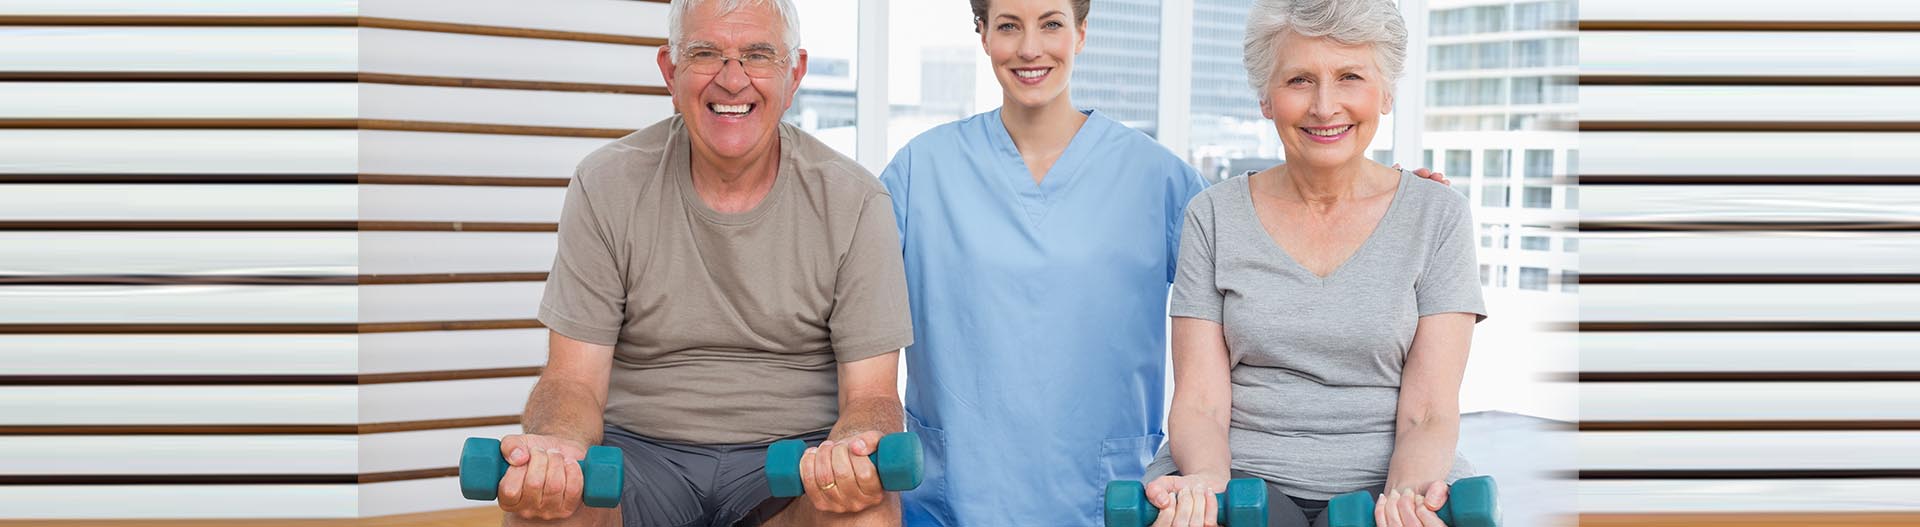 physical therapy rehabilitation